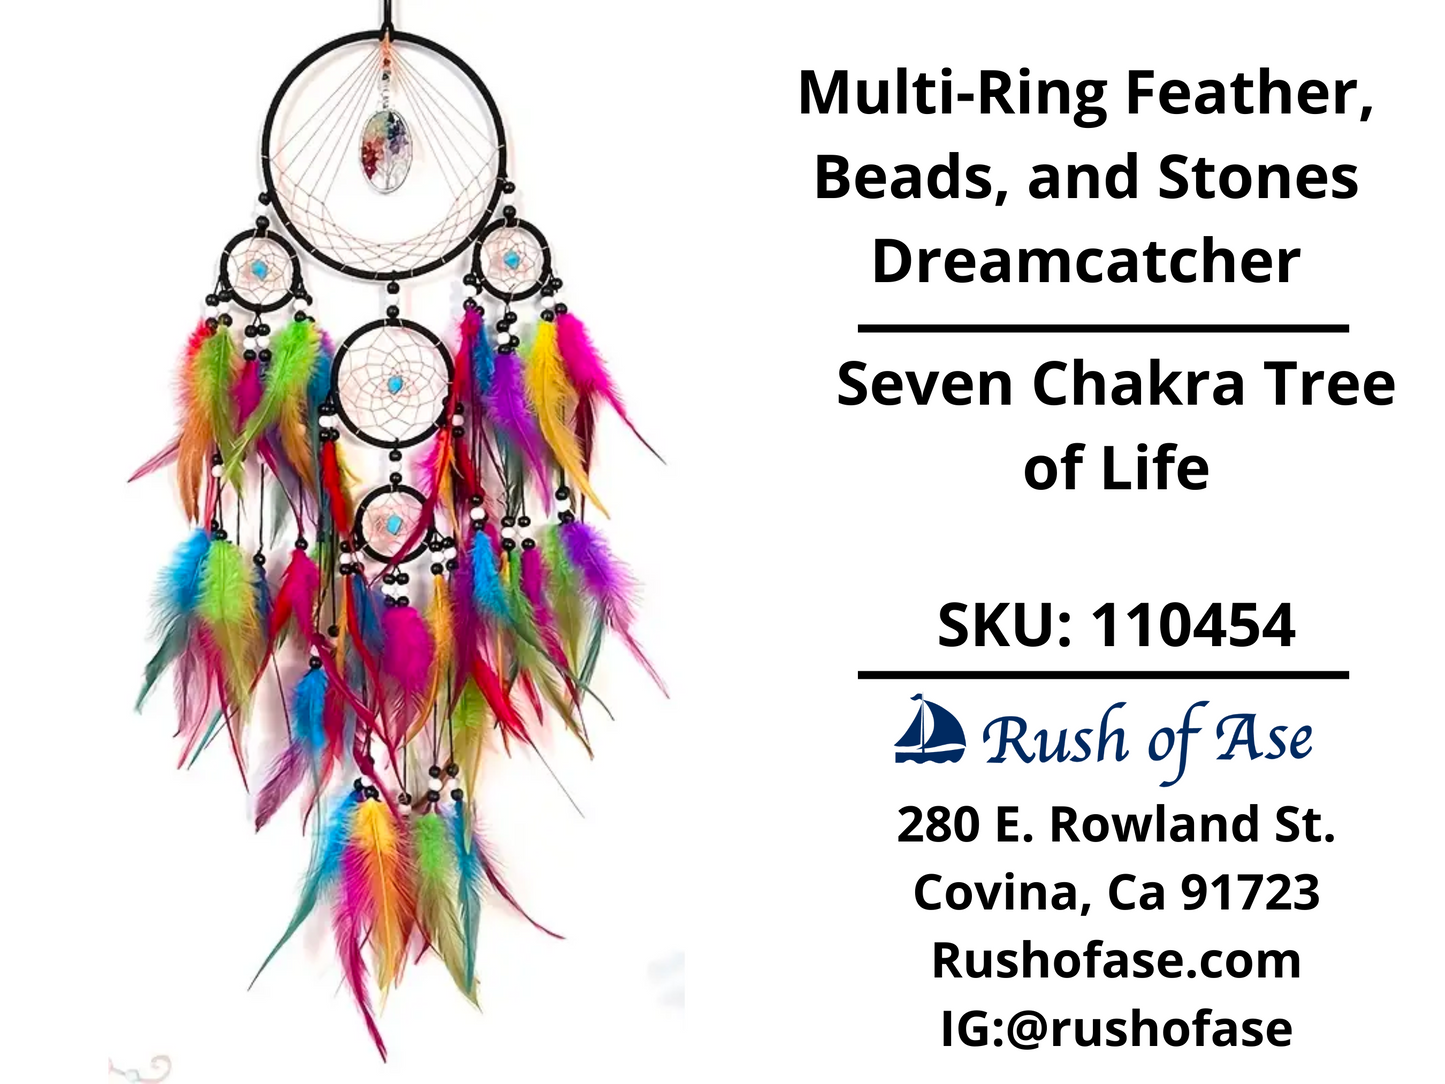 Dreamcatcher Multi-Ring Feather, Beads, and Stones